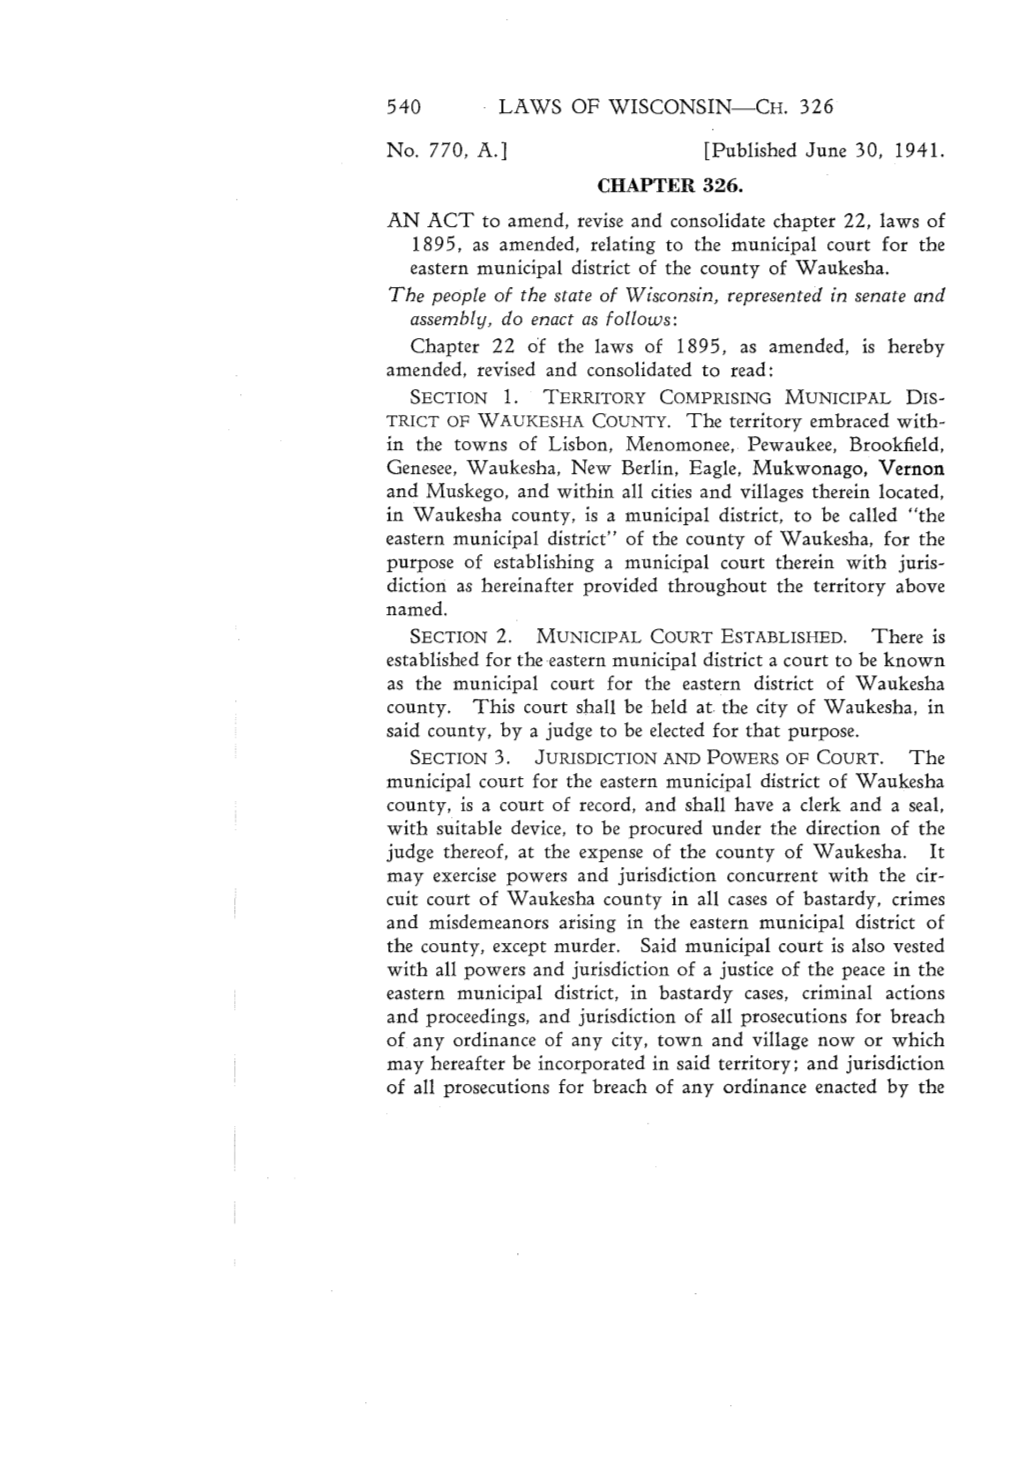 540 LAWS of WISCONSIN-CH. 326 No. 770, A.] [Published June 30